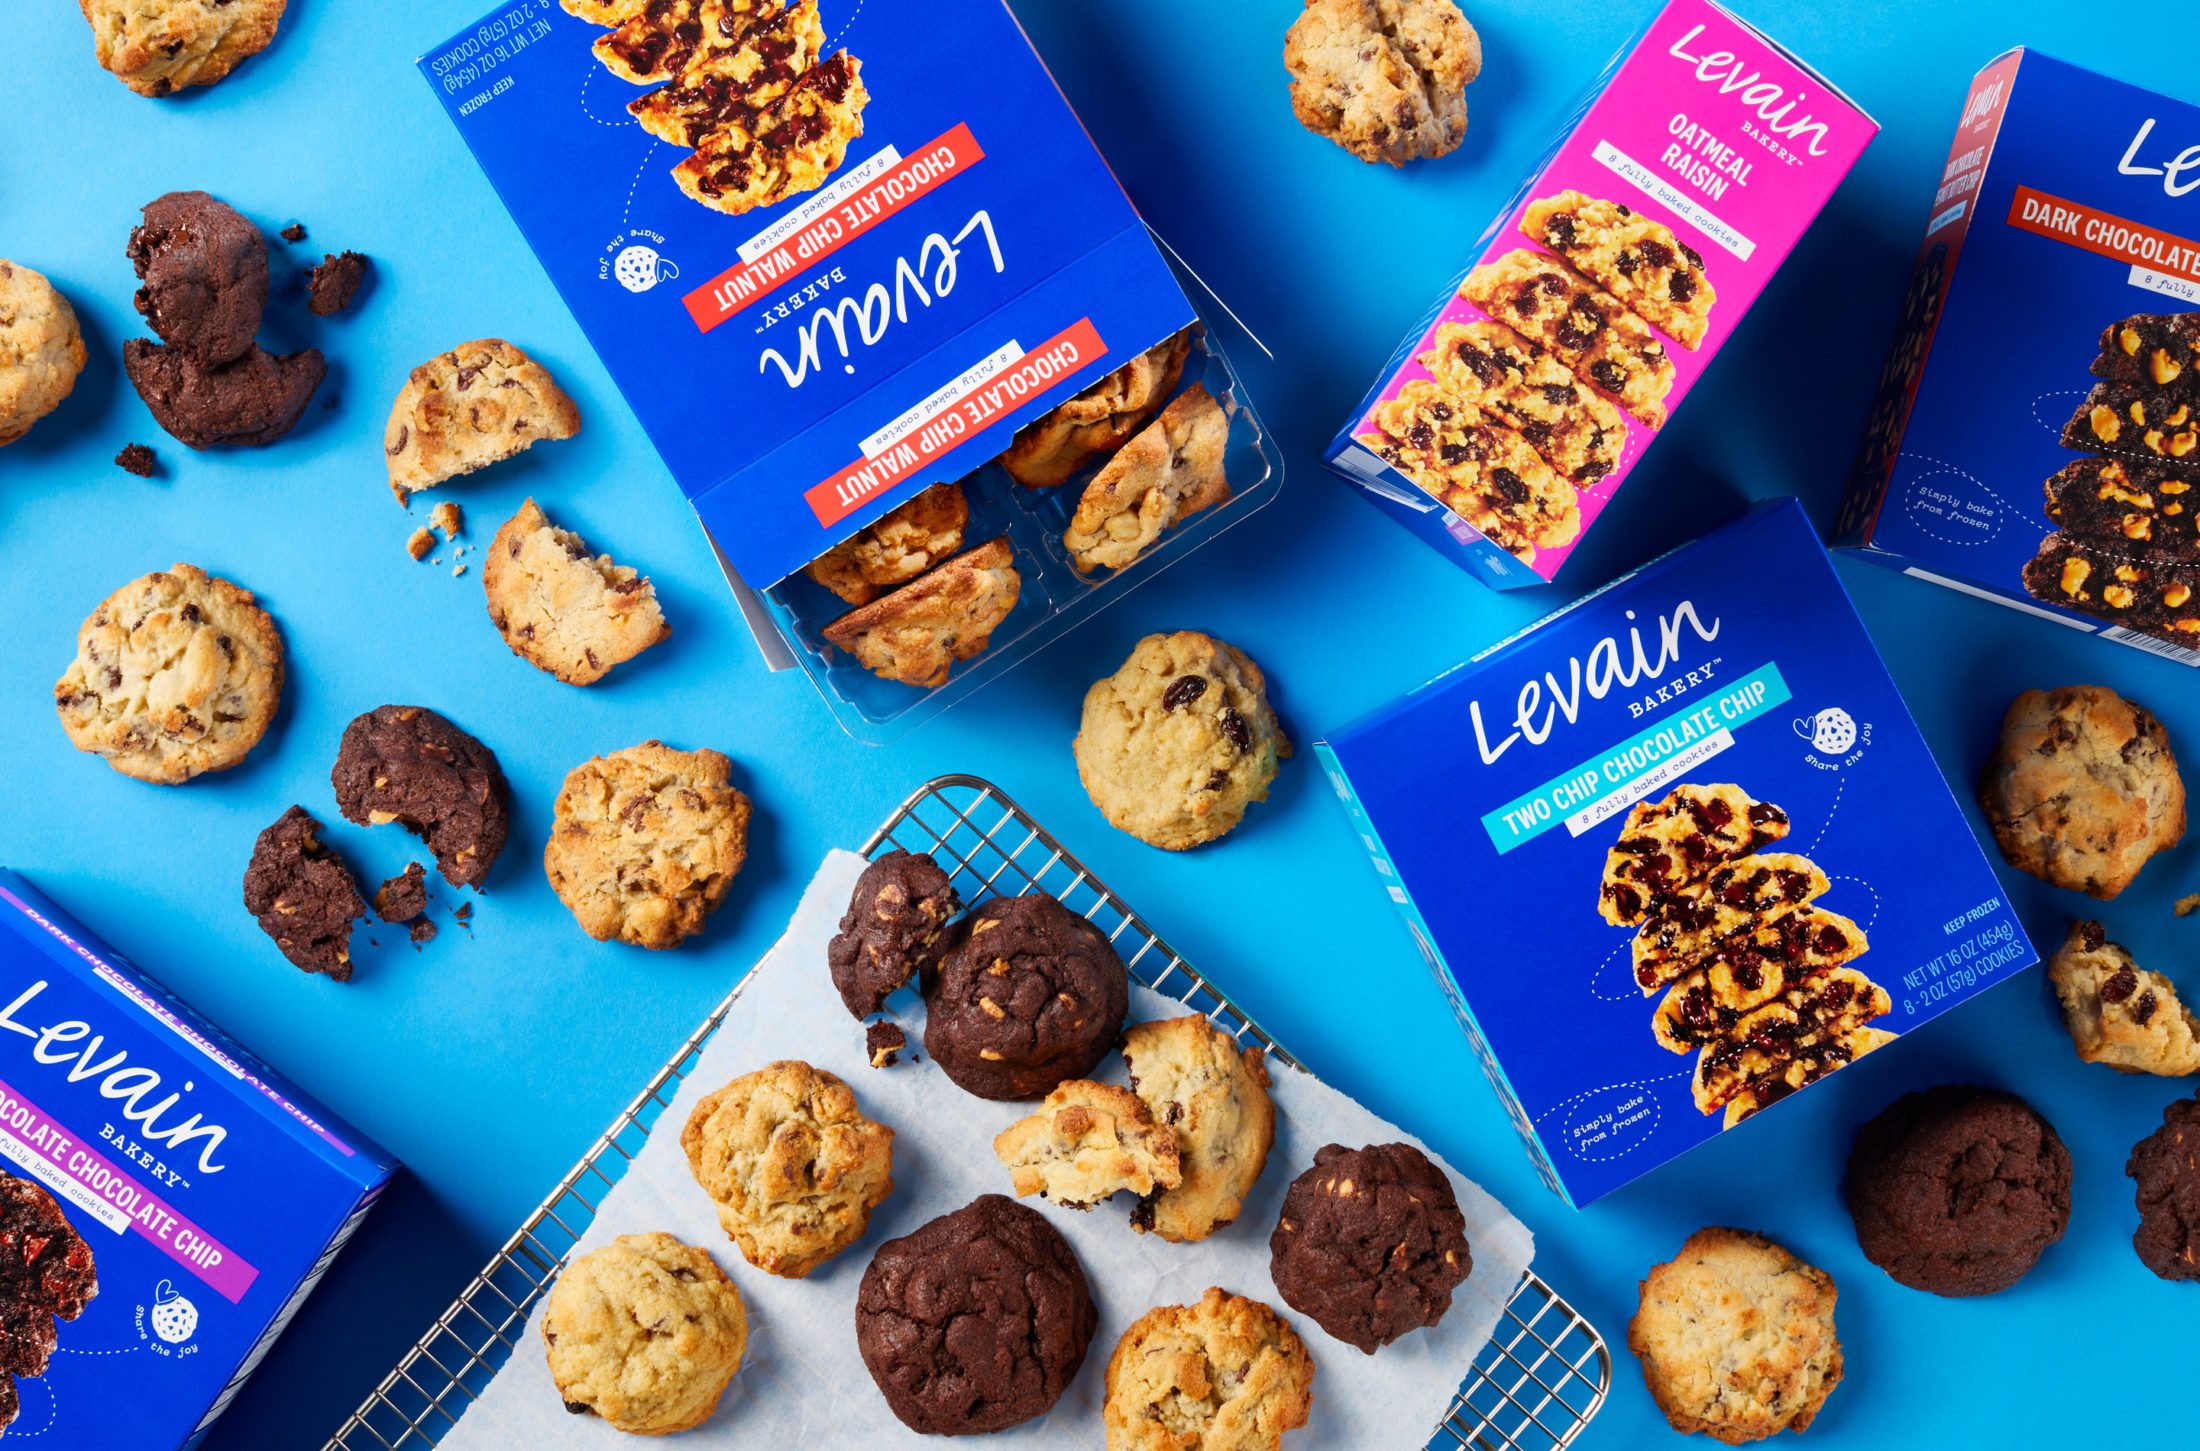 New range of Levain Bakery Fully Cooked Frozen Cookie boxes displayed on a blue background. One box opened displaying plastic tray of cookies with additional cookies on a baking rack, some cookies broken in half to view gooey center. Flavors include Chocolate Chip Walnut, Oatmeal Raisin, Two Chip Chocolate Chip, Dark Chocolate Chocolate Chip, and Dark Chocolate Peanut Butter Chip.